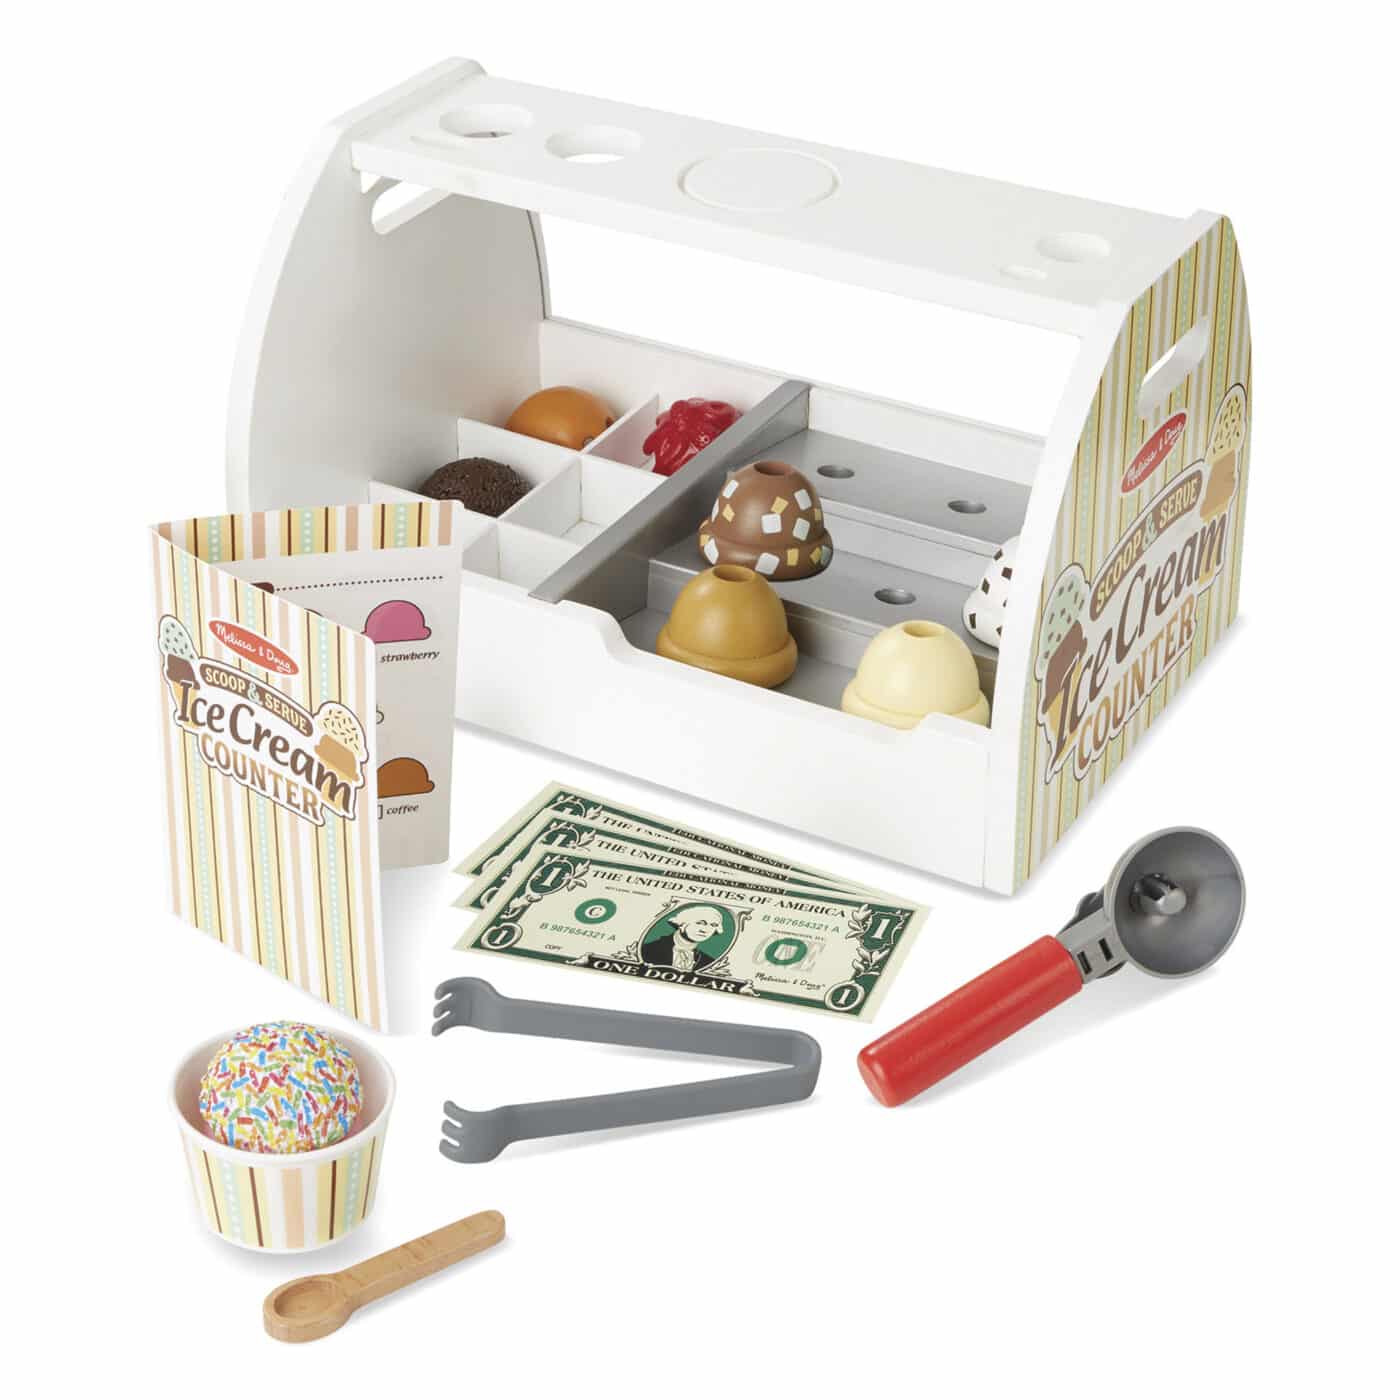 Melissa and Doug Wooden Scoop and Serve Ice Cream Counter